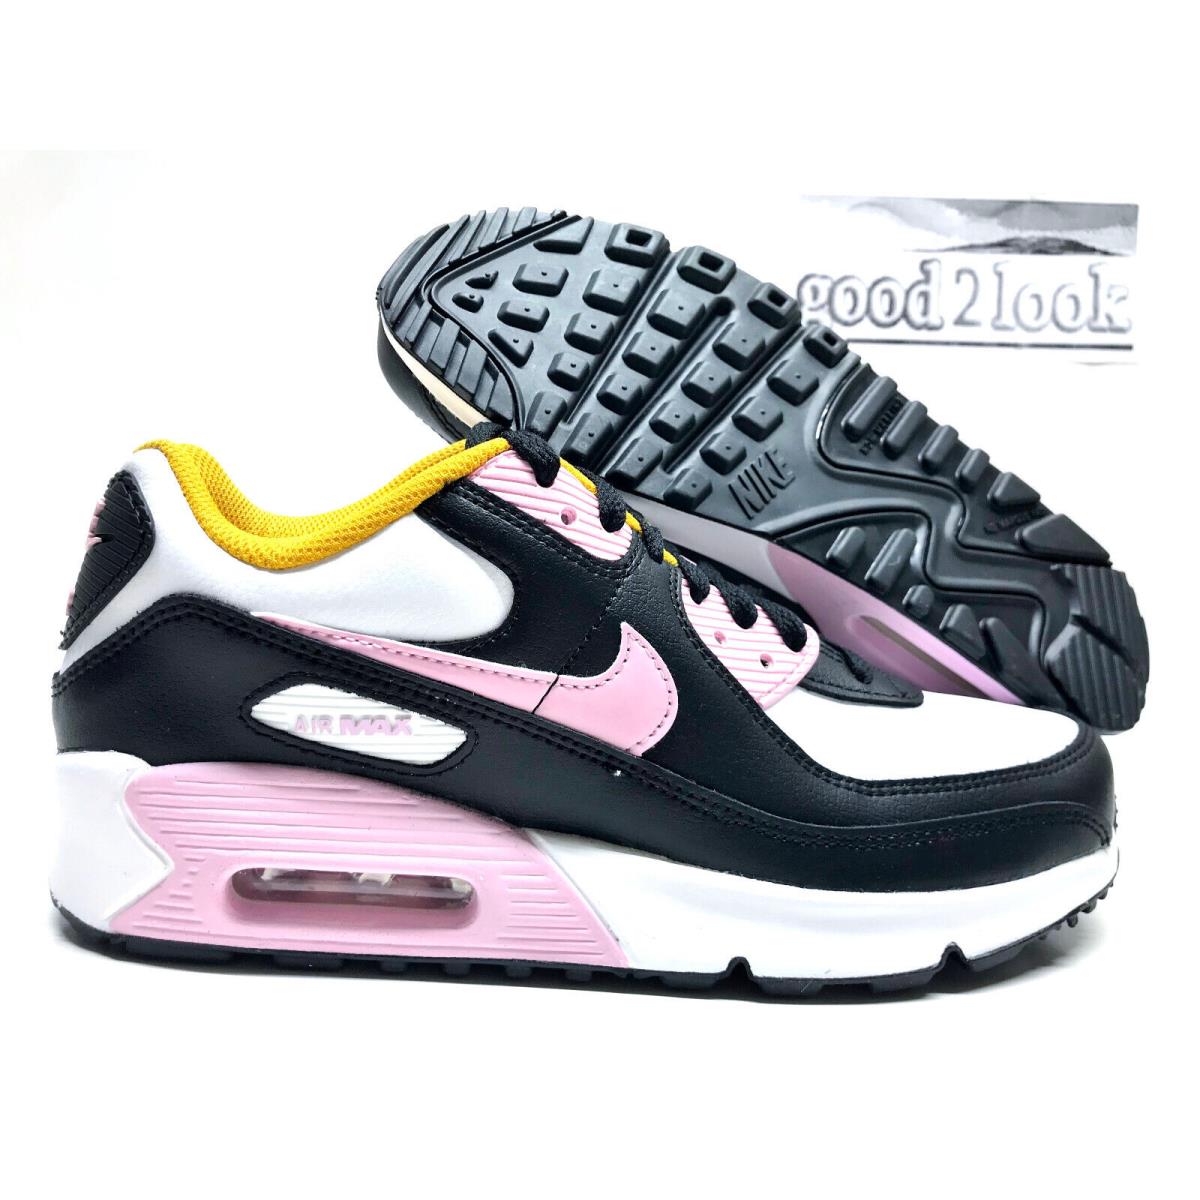 Nike Air Max 90 Ltr GS Black/pink-white Size 7Y/WOMEN`S 8.5 CD6864-007